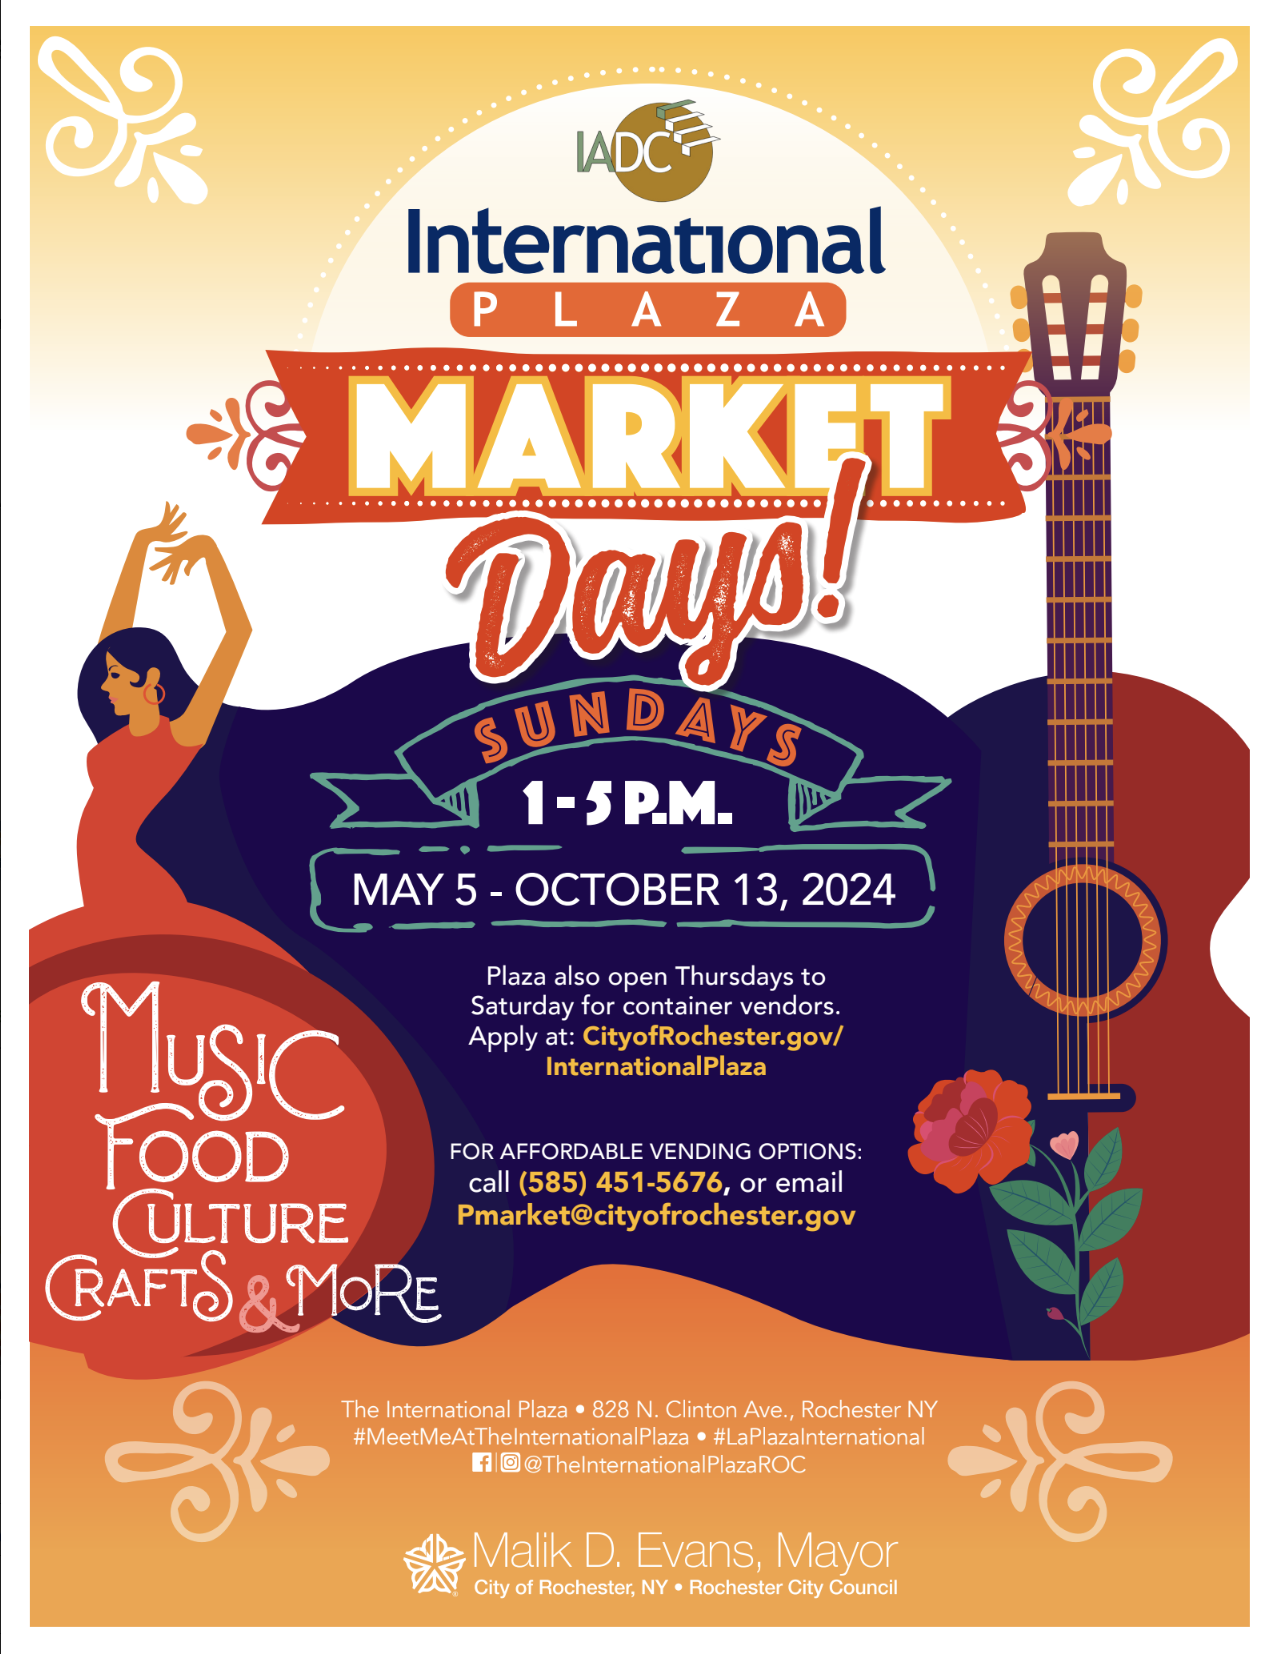 The International Plaza season begins on May 5th with a Cinco de Mayo festival! Come support local vendors and enjoy music and dancing!